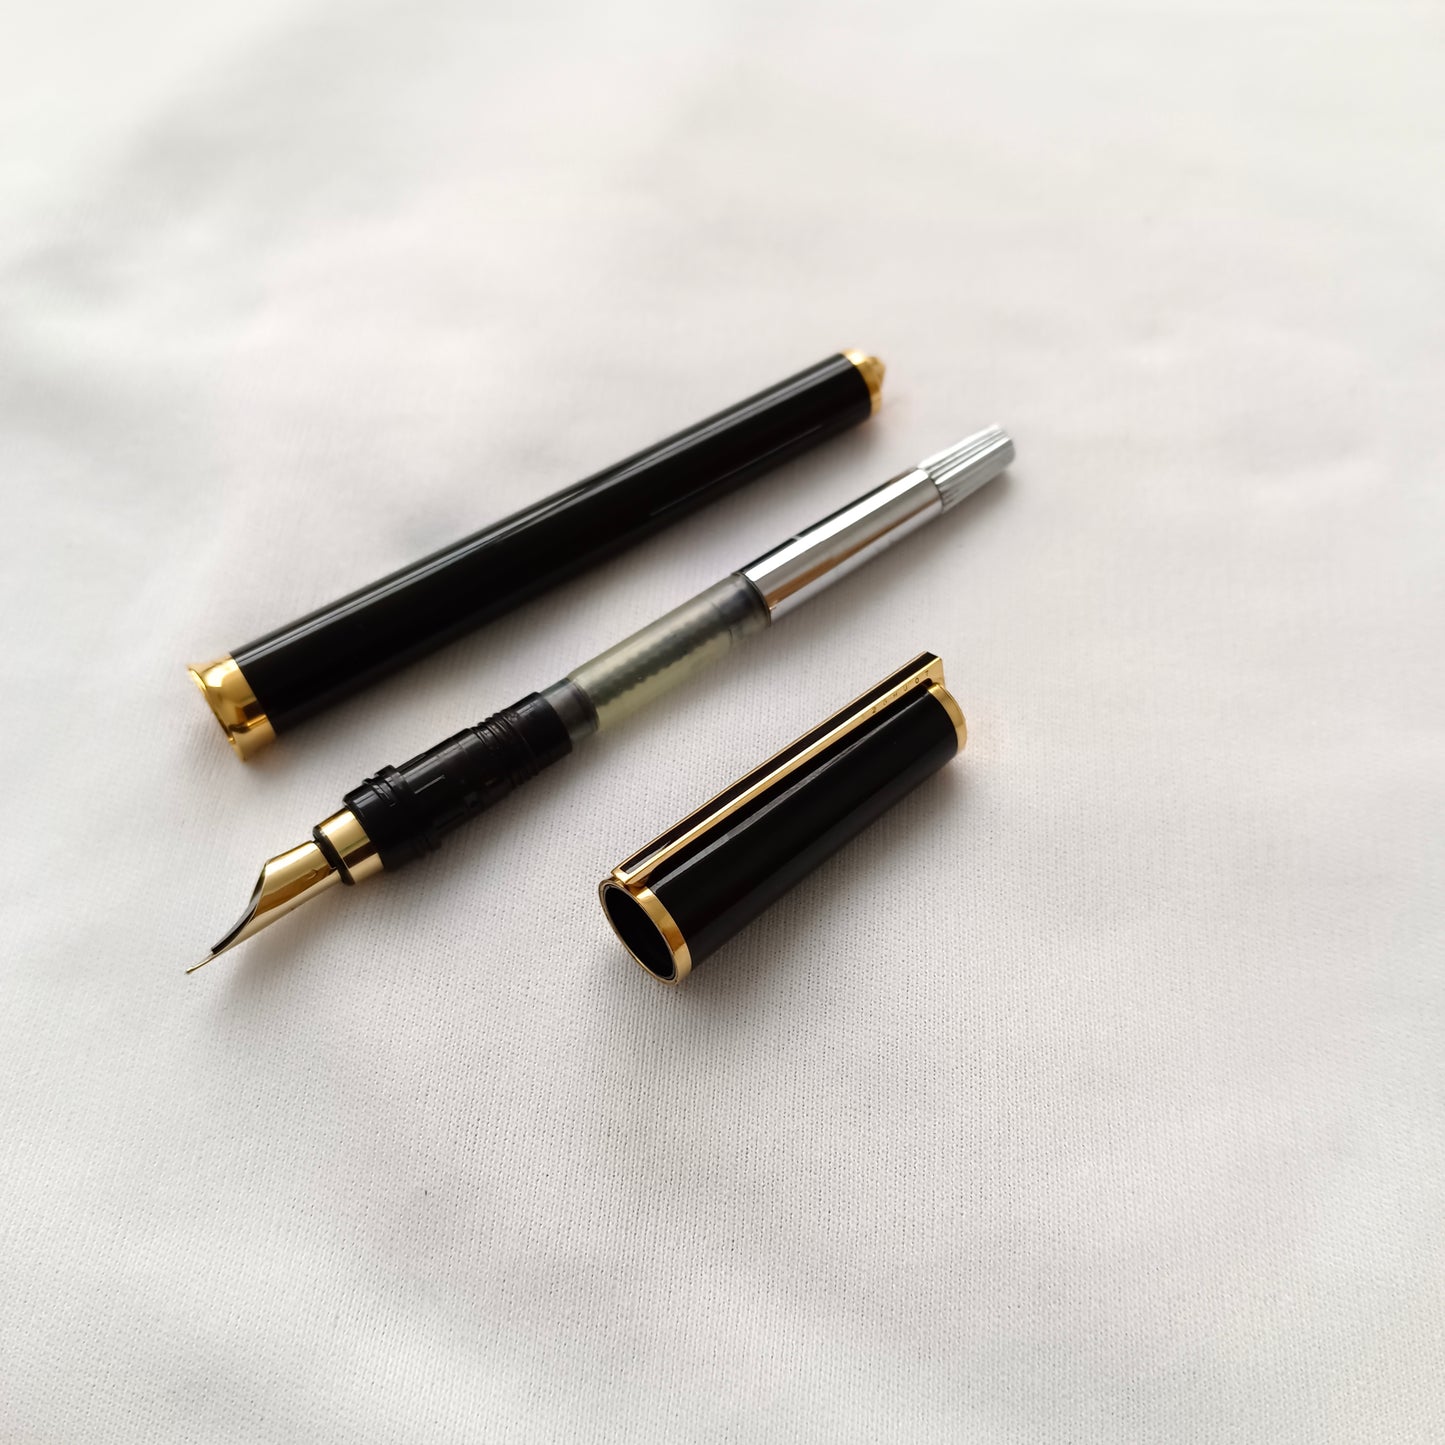 S.T. Dupont Black Lacquer Gatsby Fountain Pen